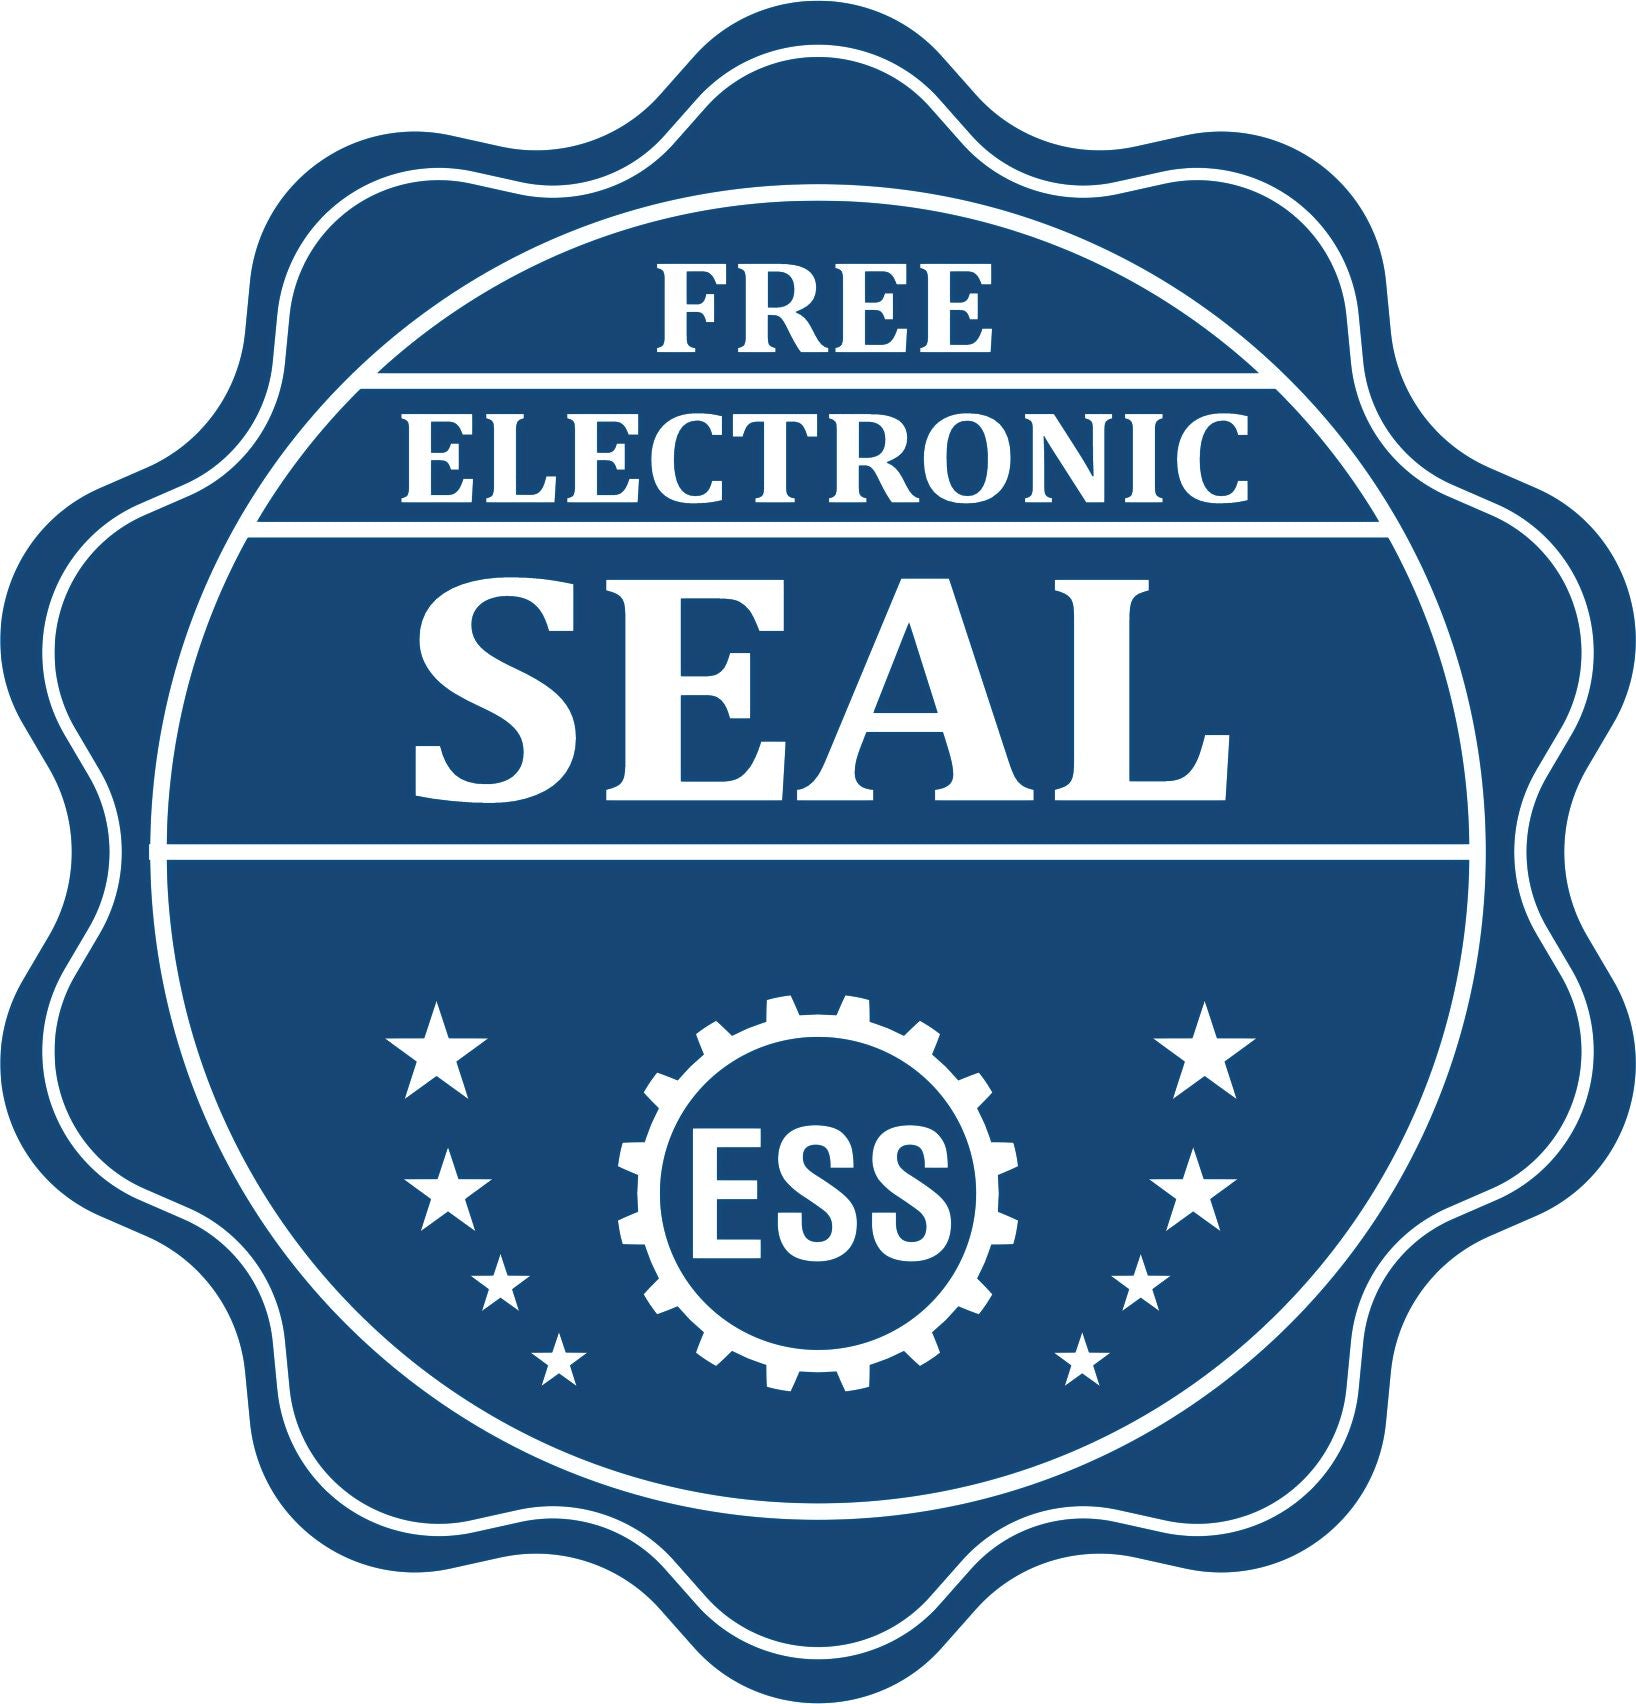 A badge showing a free electronic seal for the Heavy Duty Cast Iron Georgia Land Surveyor Seal Embosser with stars and the ESS gear on the emblem.